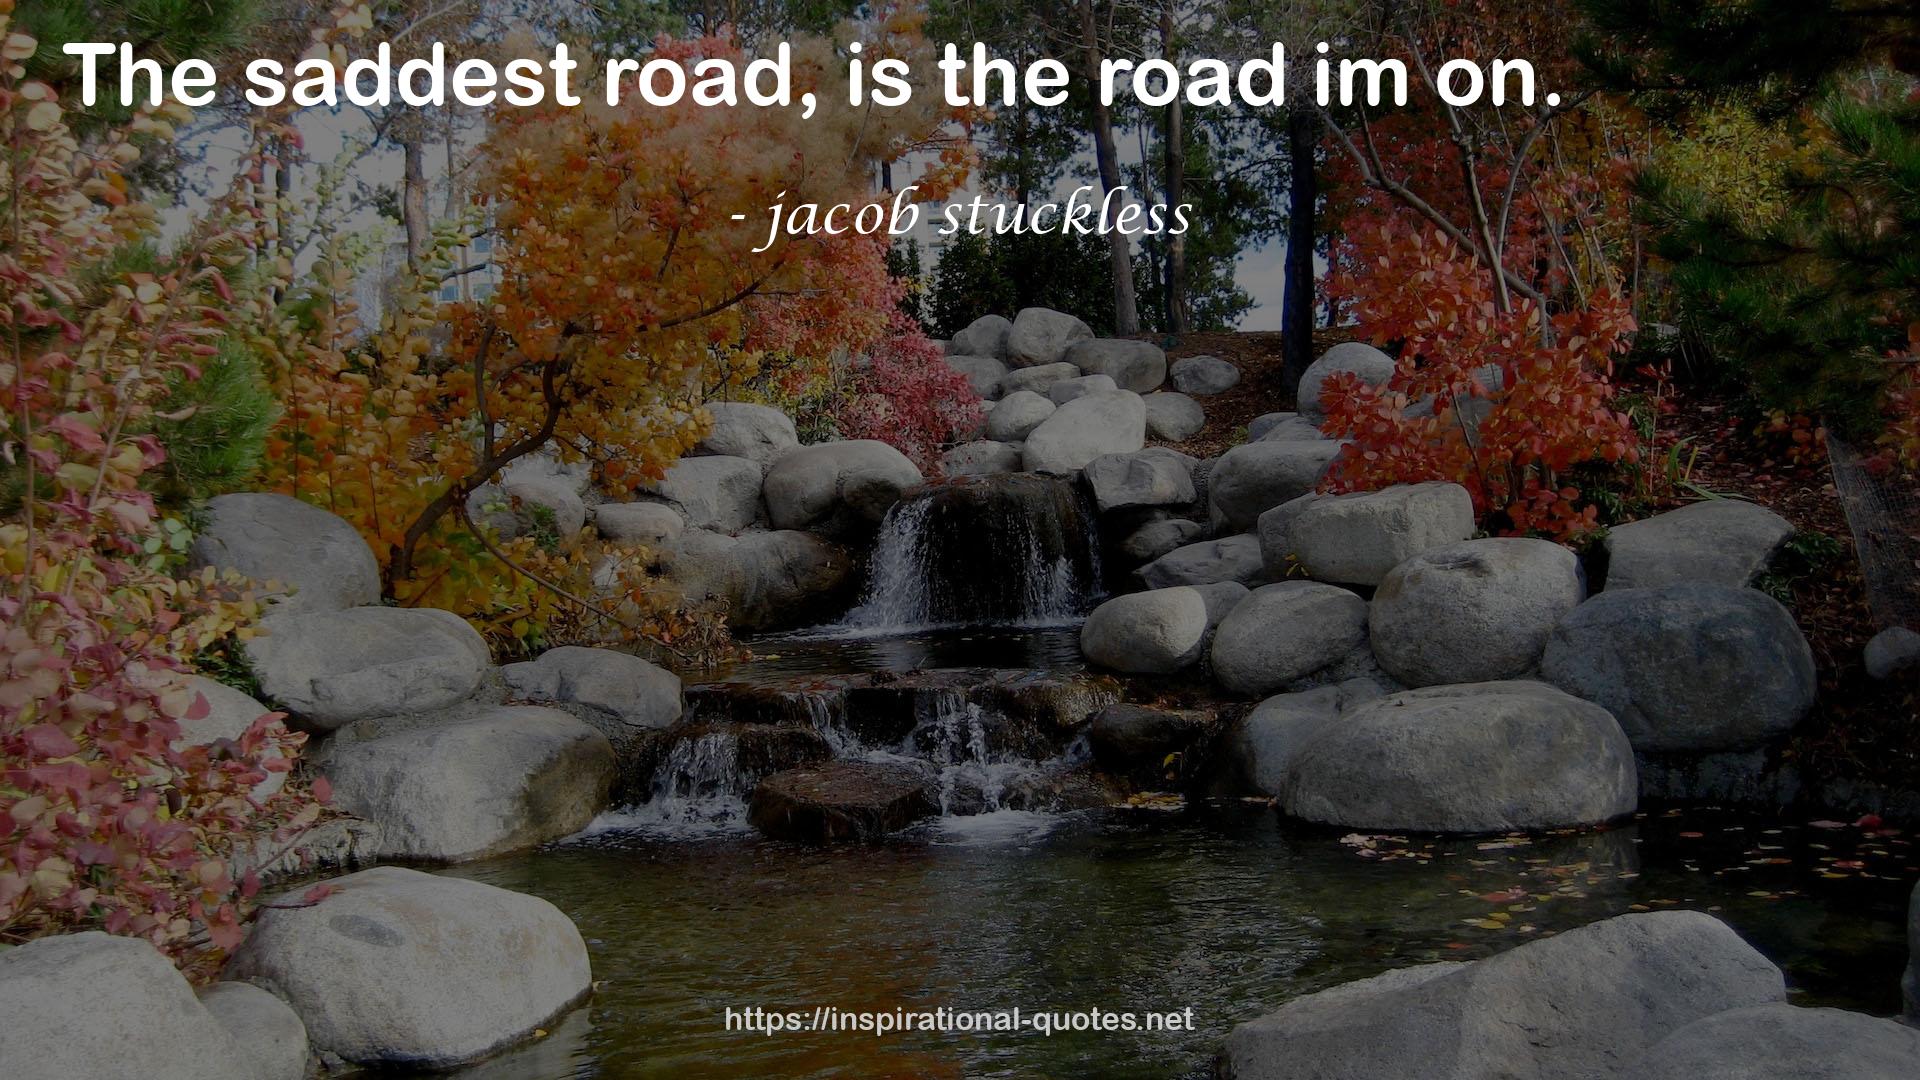 jacob stuckless QUOTES